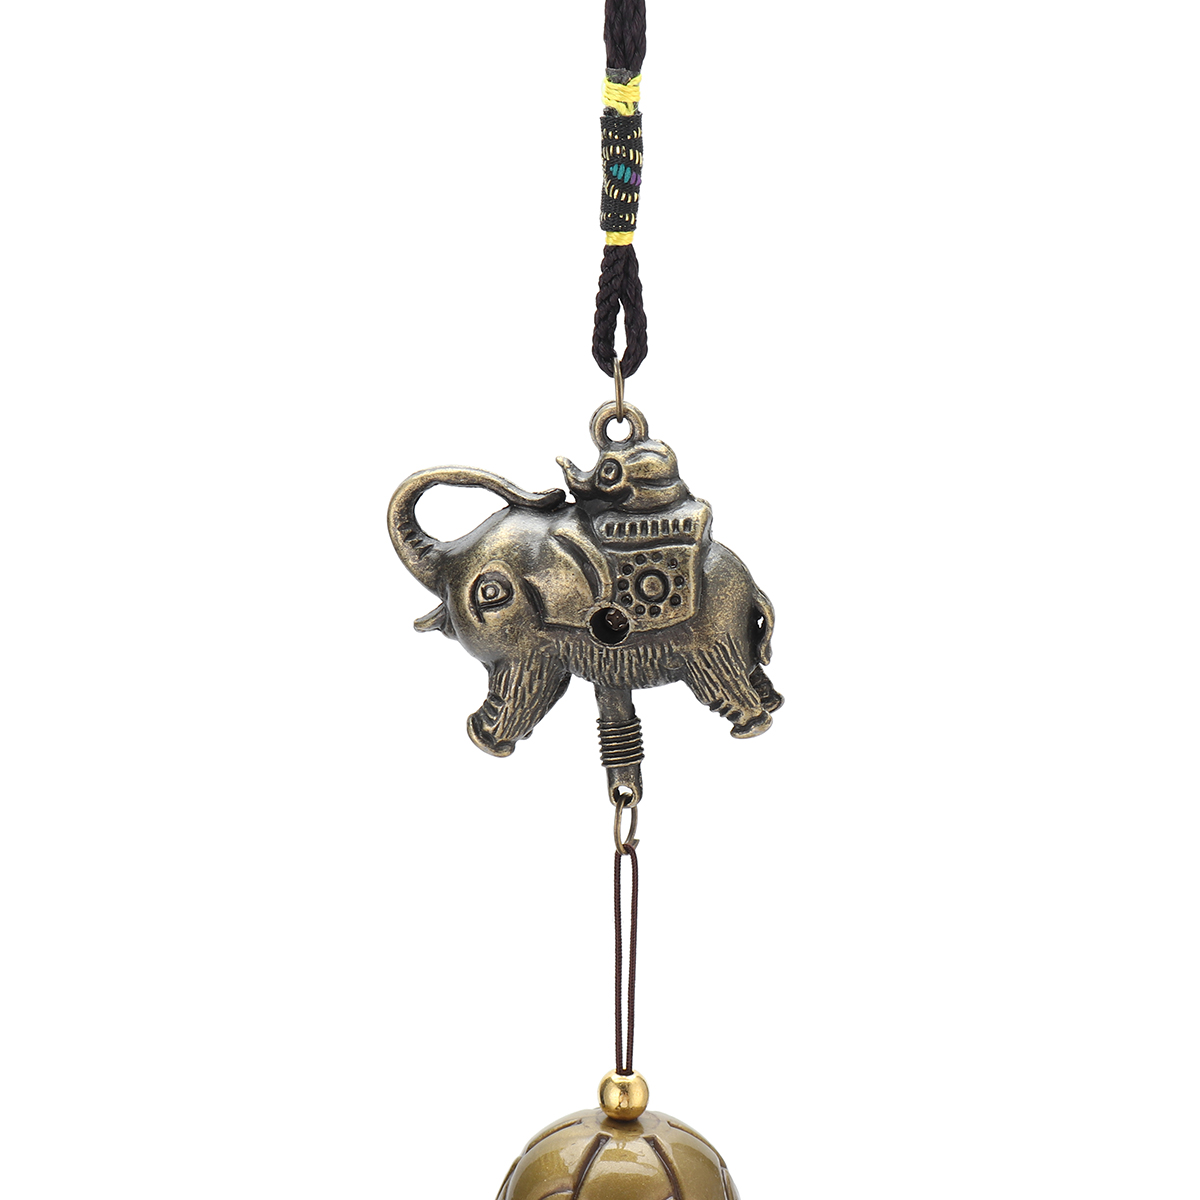 Copper-Lucky-Feng-Shui-Wind-Chime-Hanging-Bell-Jingle-Doorative-Pendant-Charm-1745703-10